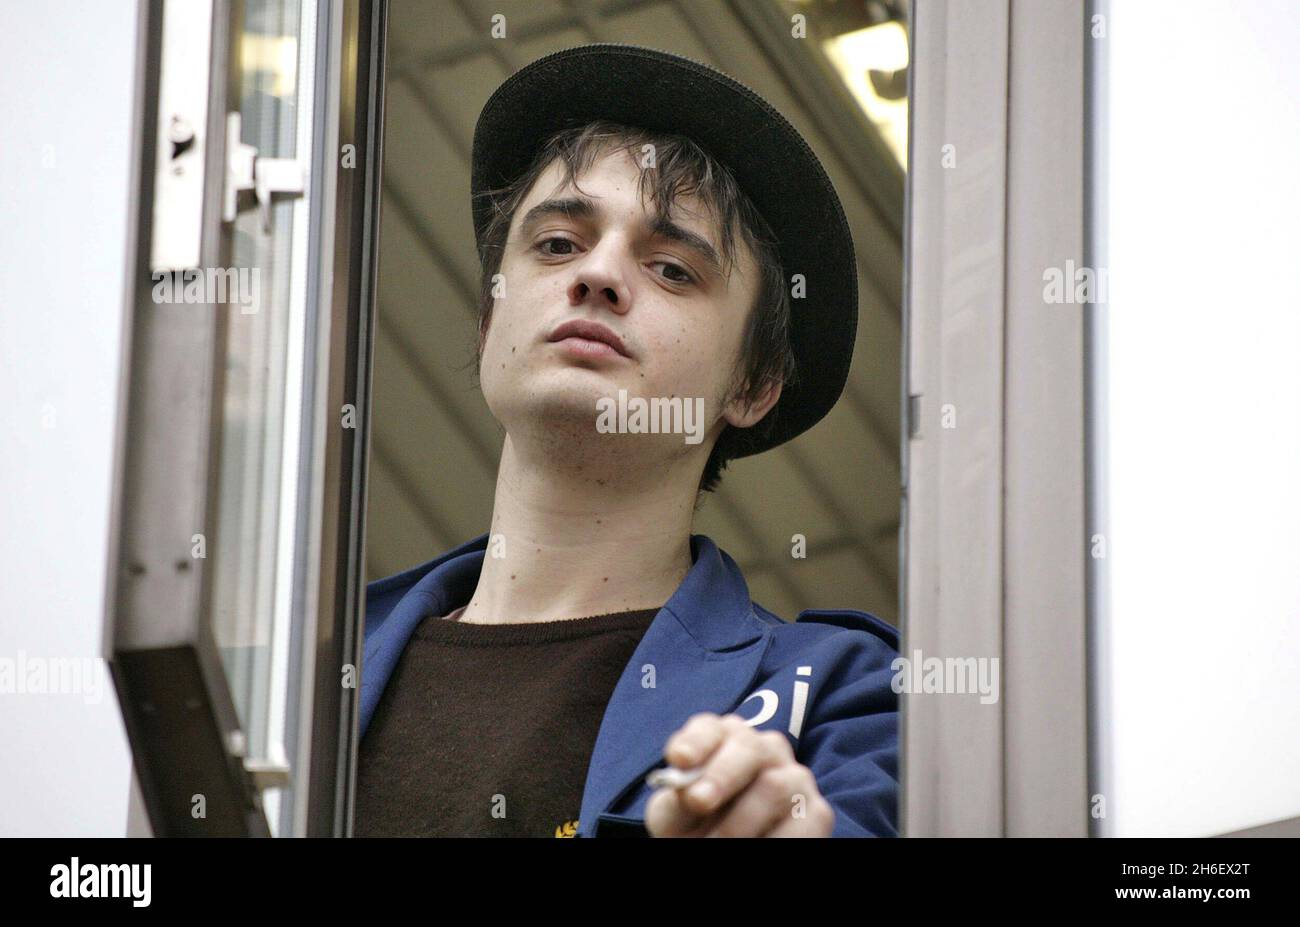 Singer Pete Doherty appears at the window of Thames Magistrates court in London today as he awaits his court hearing for drugs charges . Stock Photo